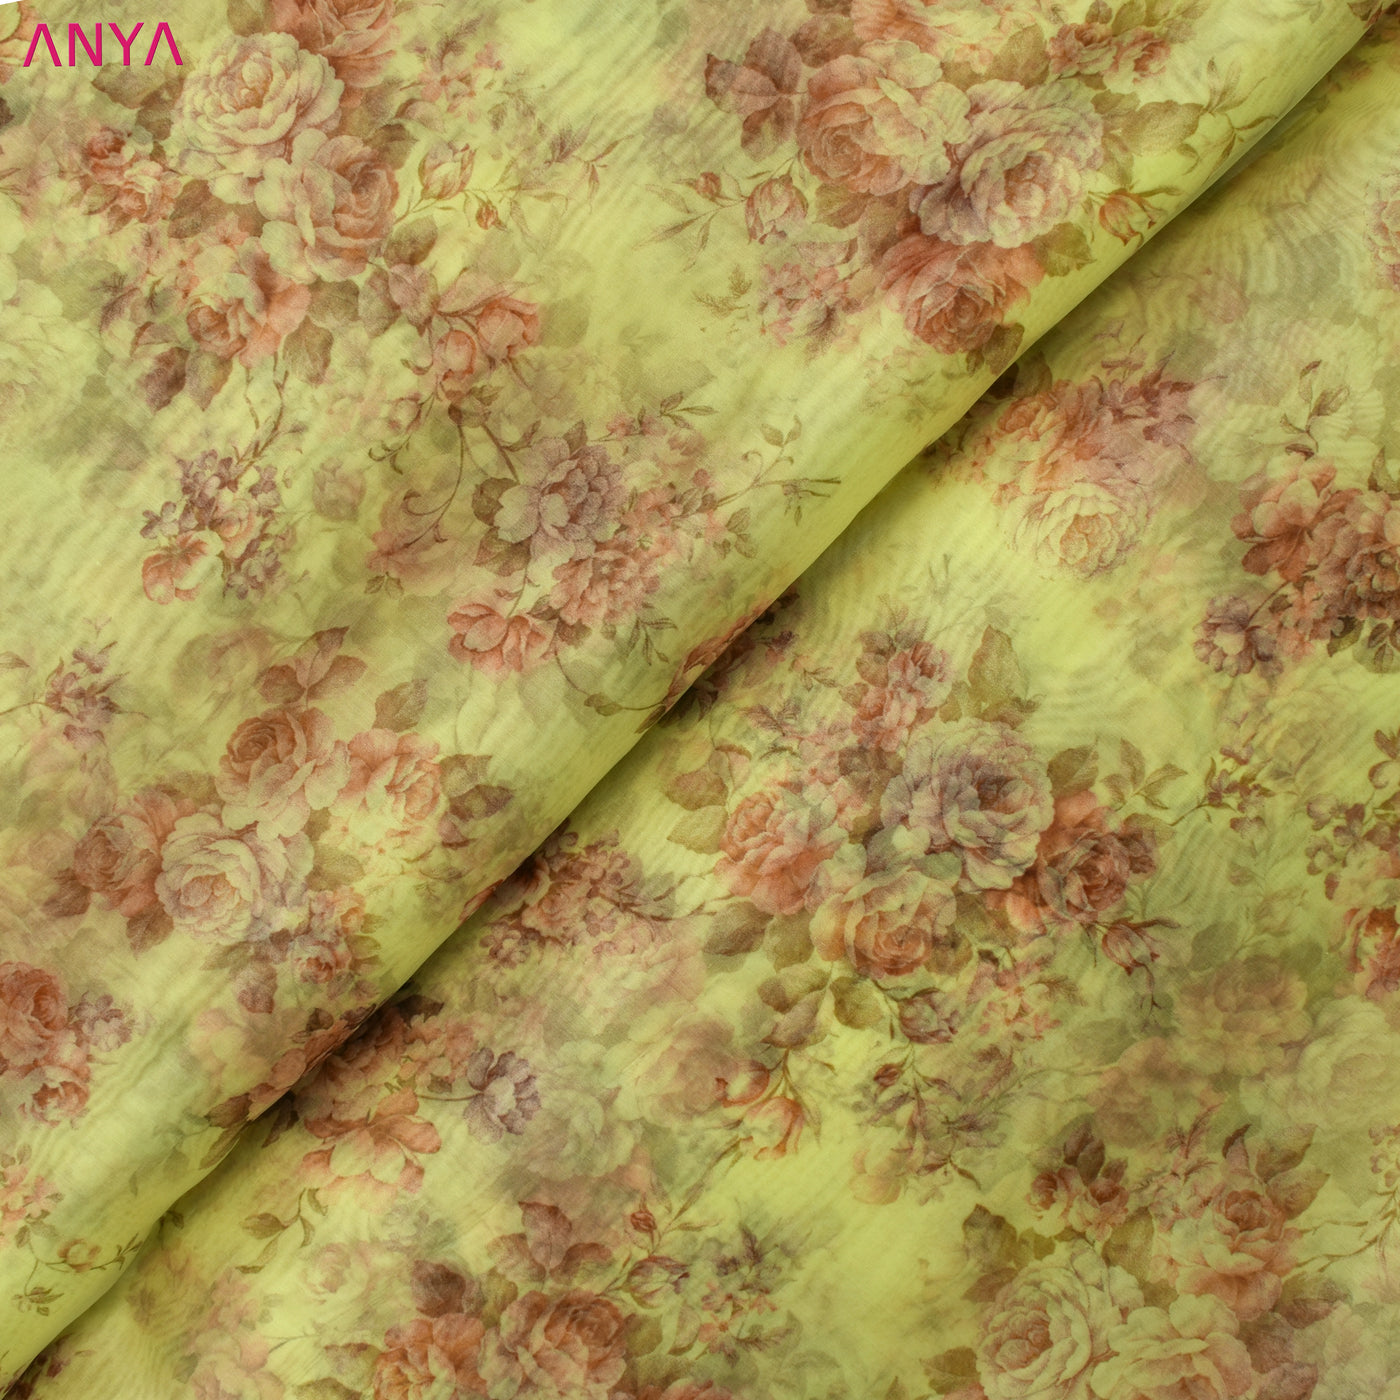 Lemon Yellow Organza Fabric with Floral Design